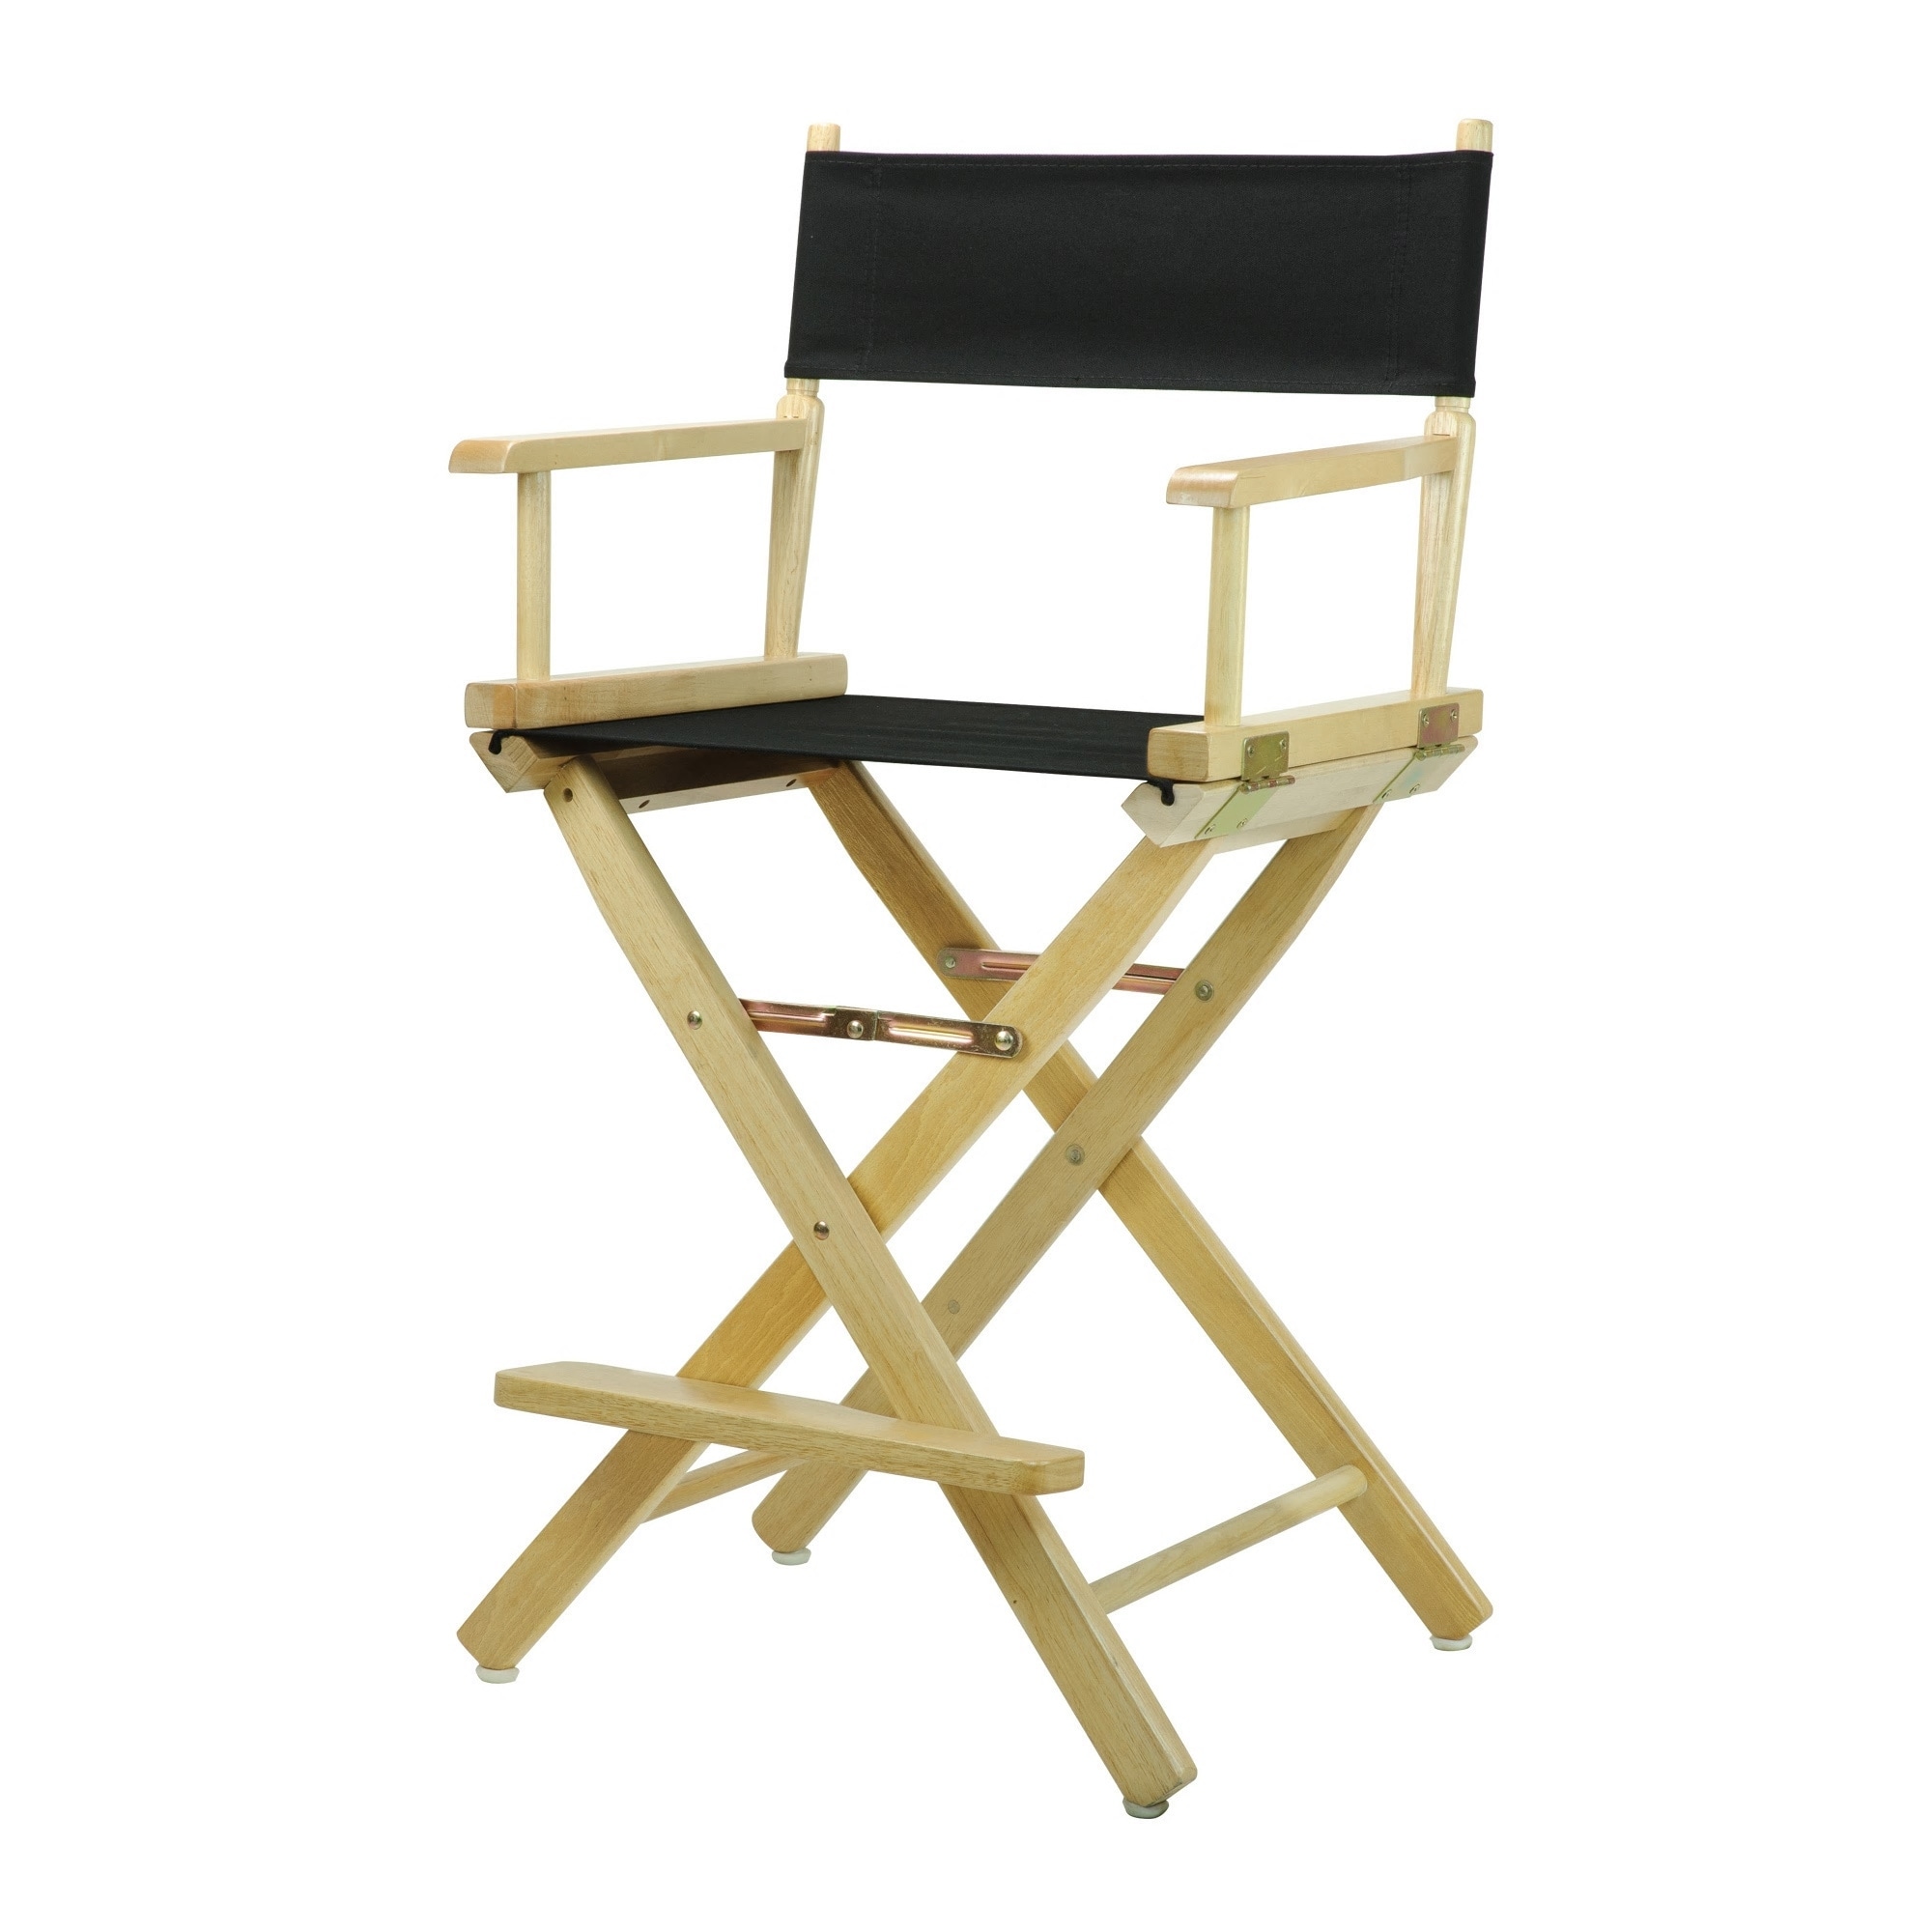 Natural Finish 24-inch Directorundefineds Chair On Sale 13223542